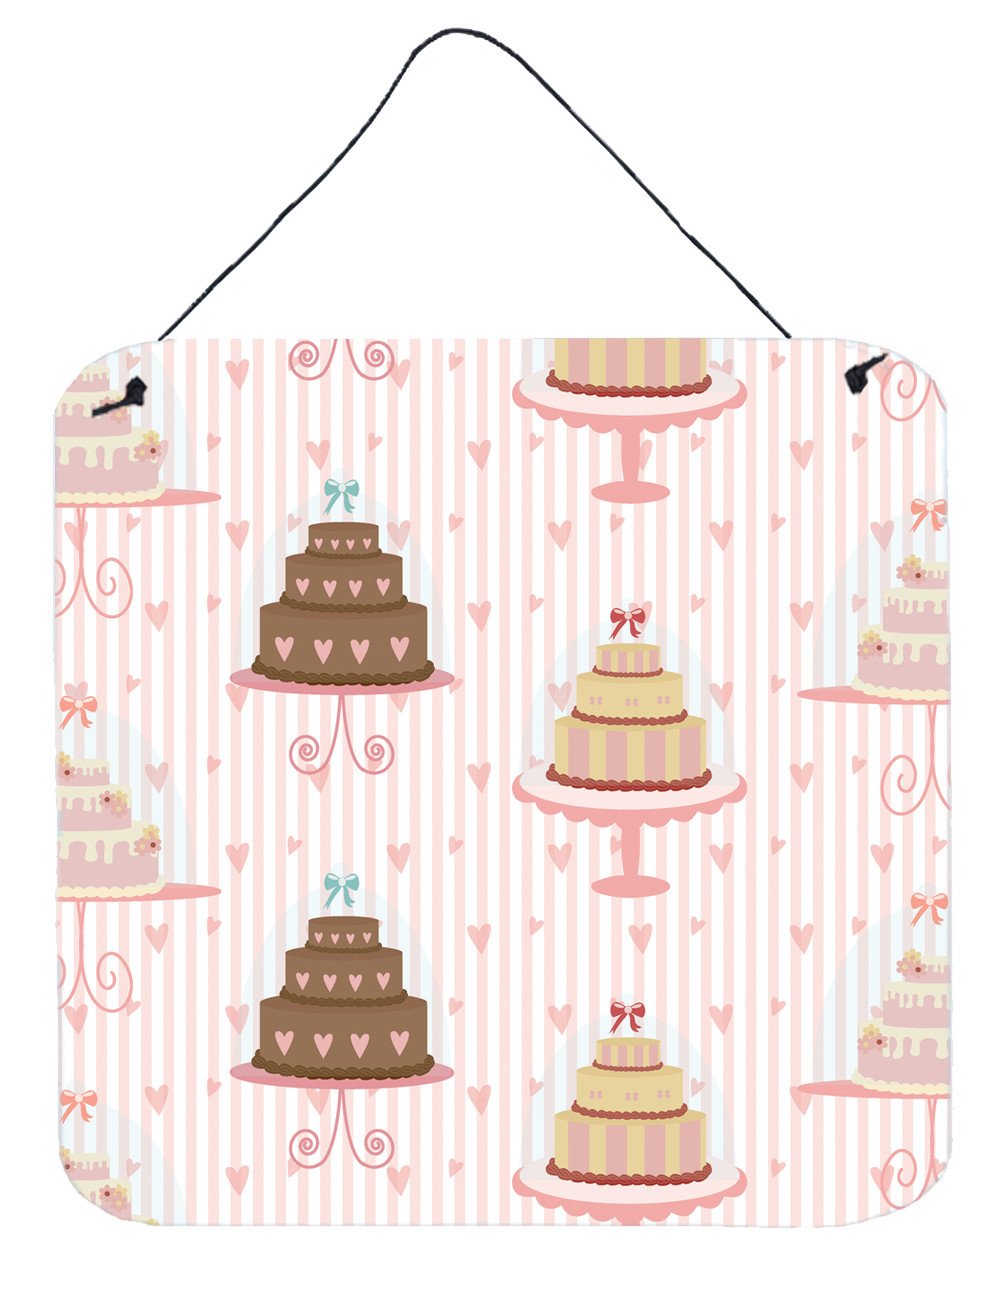 Decorated Cakes Wall or Door Hanging Prints BB7311DS66 by Caroline's Treasures